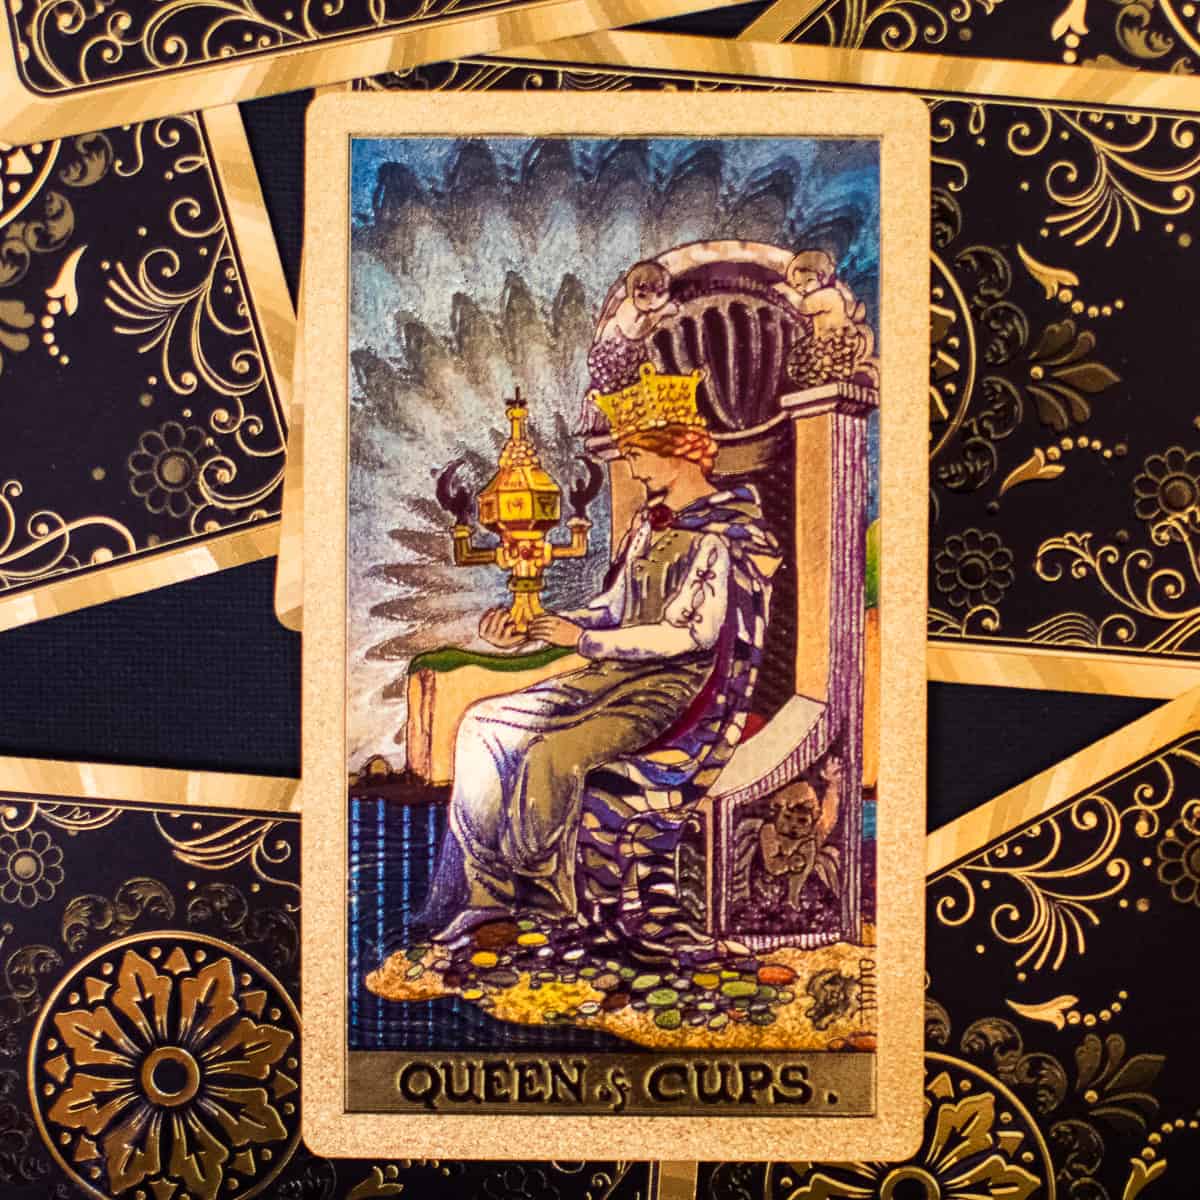 A queen on a throne with a golden cup, depicted on a tarot card.